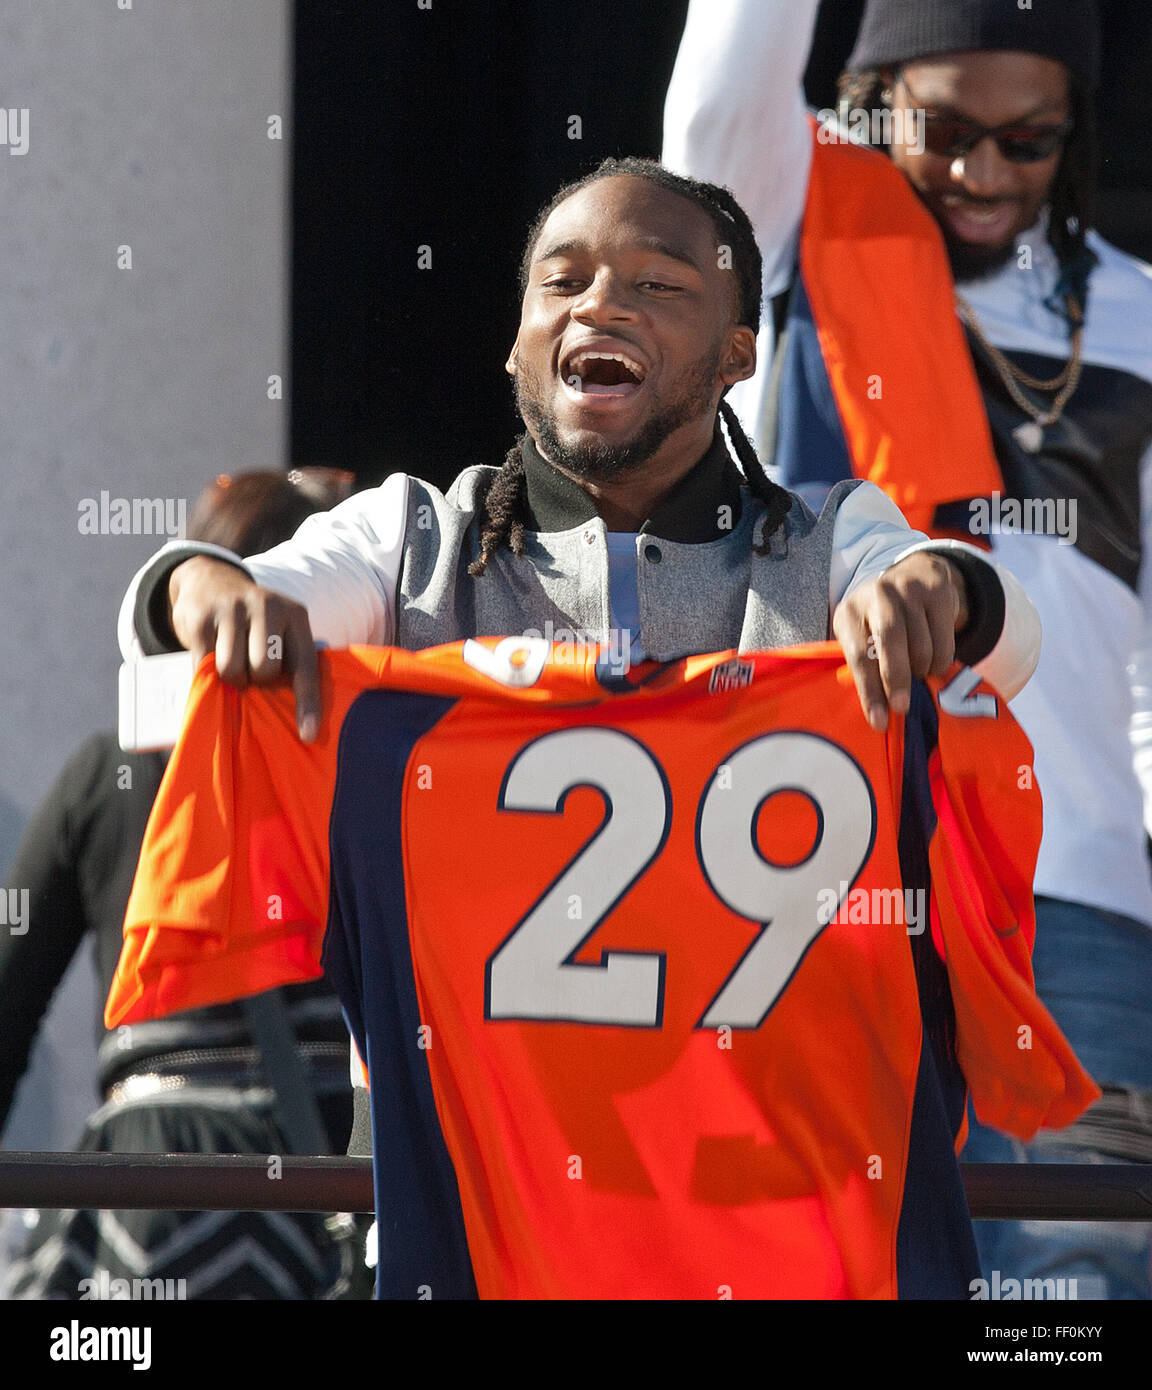 Denver, Colorado, USA. 9th Feb, 2016. Broncos BRADLEY ROBY celebrates with team mates during the Super Bowl victory celebration at the Denver City & County Building in downtown Denver Tuesday afternoon. Credit:  Hector Acevedo/ZUMA Wire/Alamy Live News Stock Photo